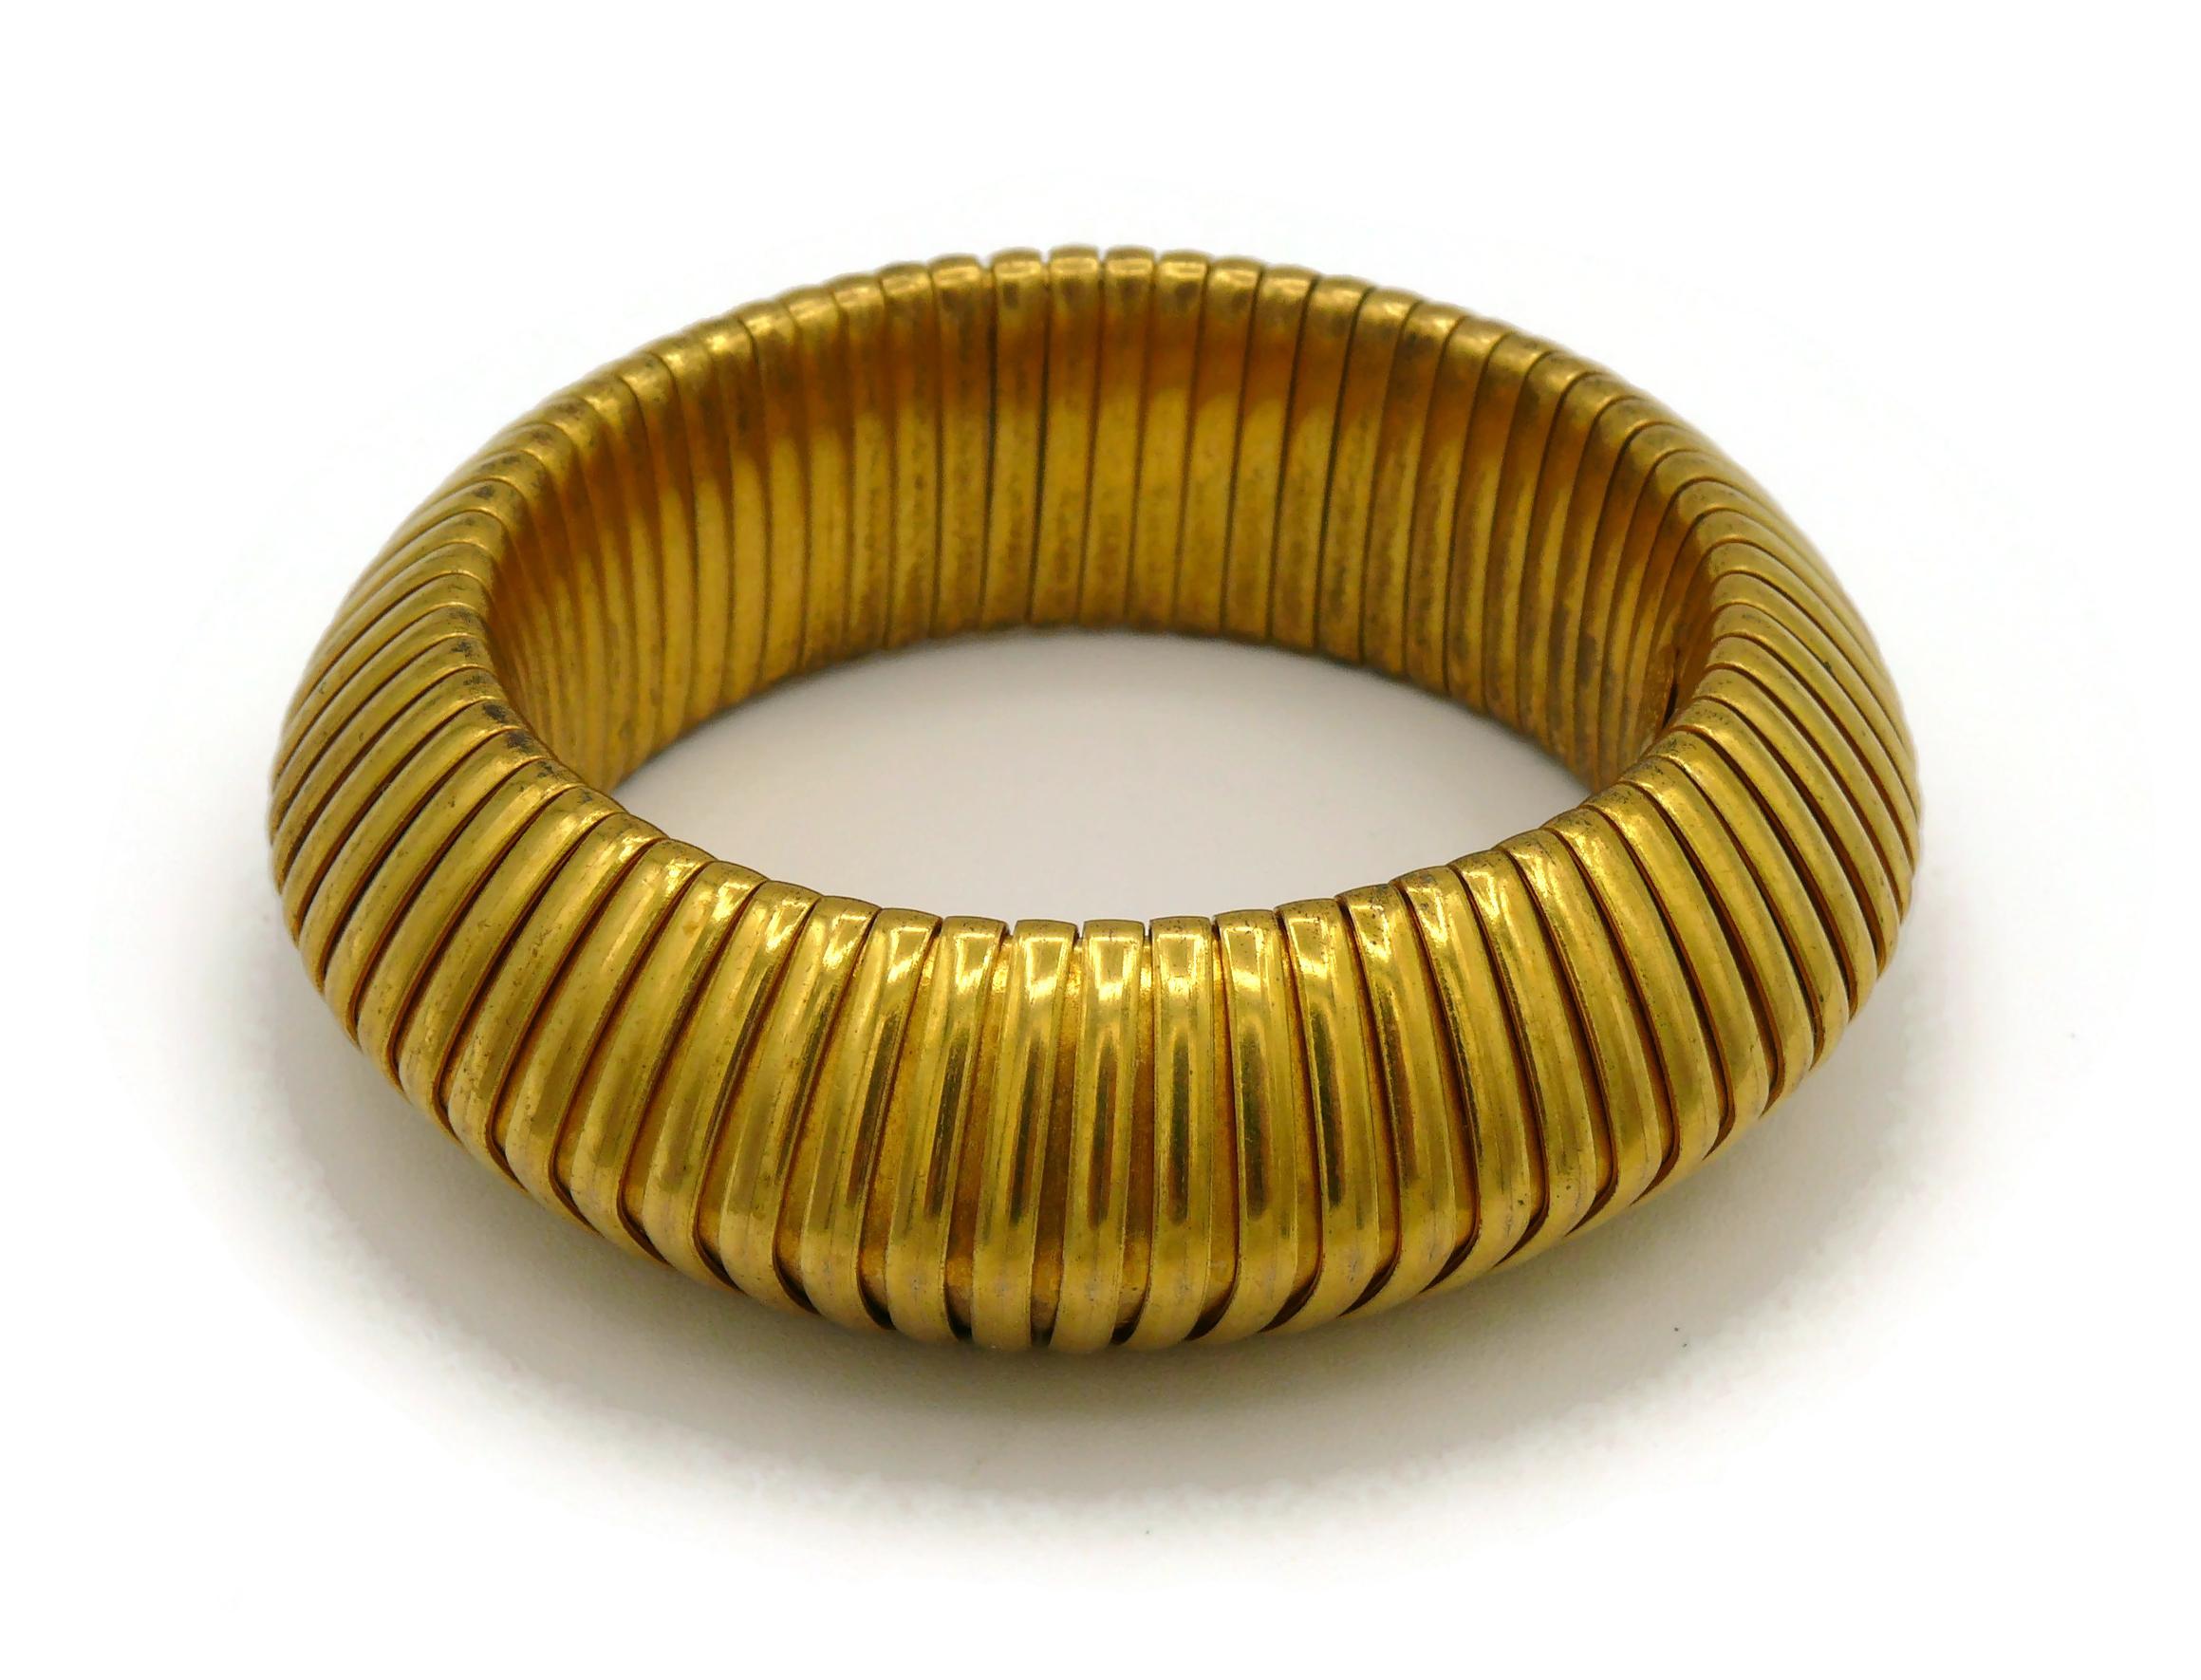 Yves Saint Laurent Rive Gauche Vintage Gold Toned Bracelet In Good Condition For Sale In Nice, FR